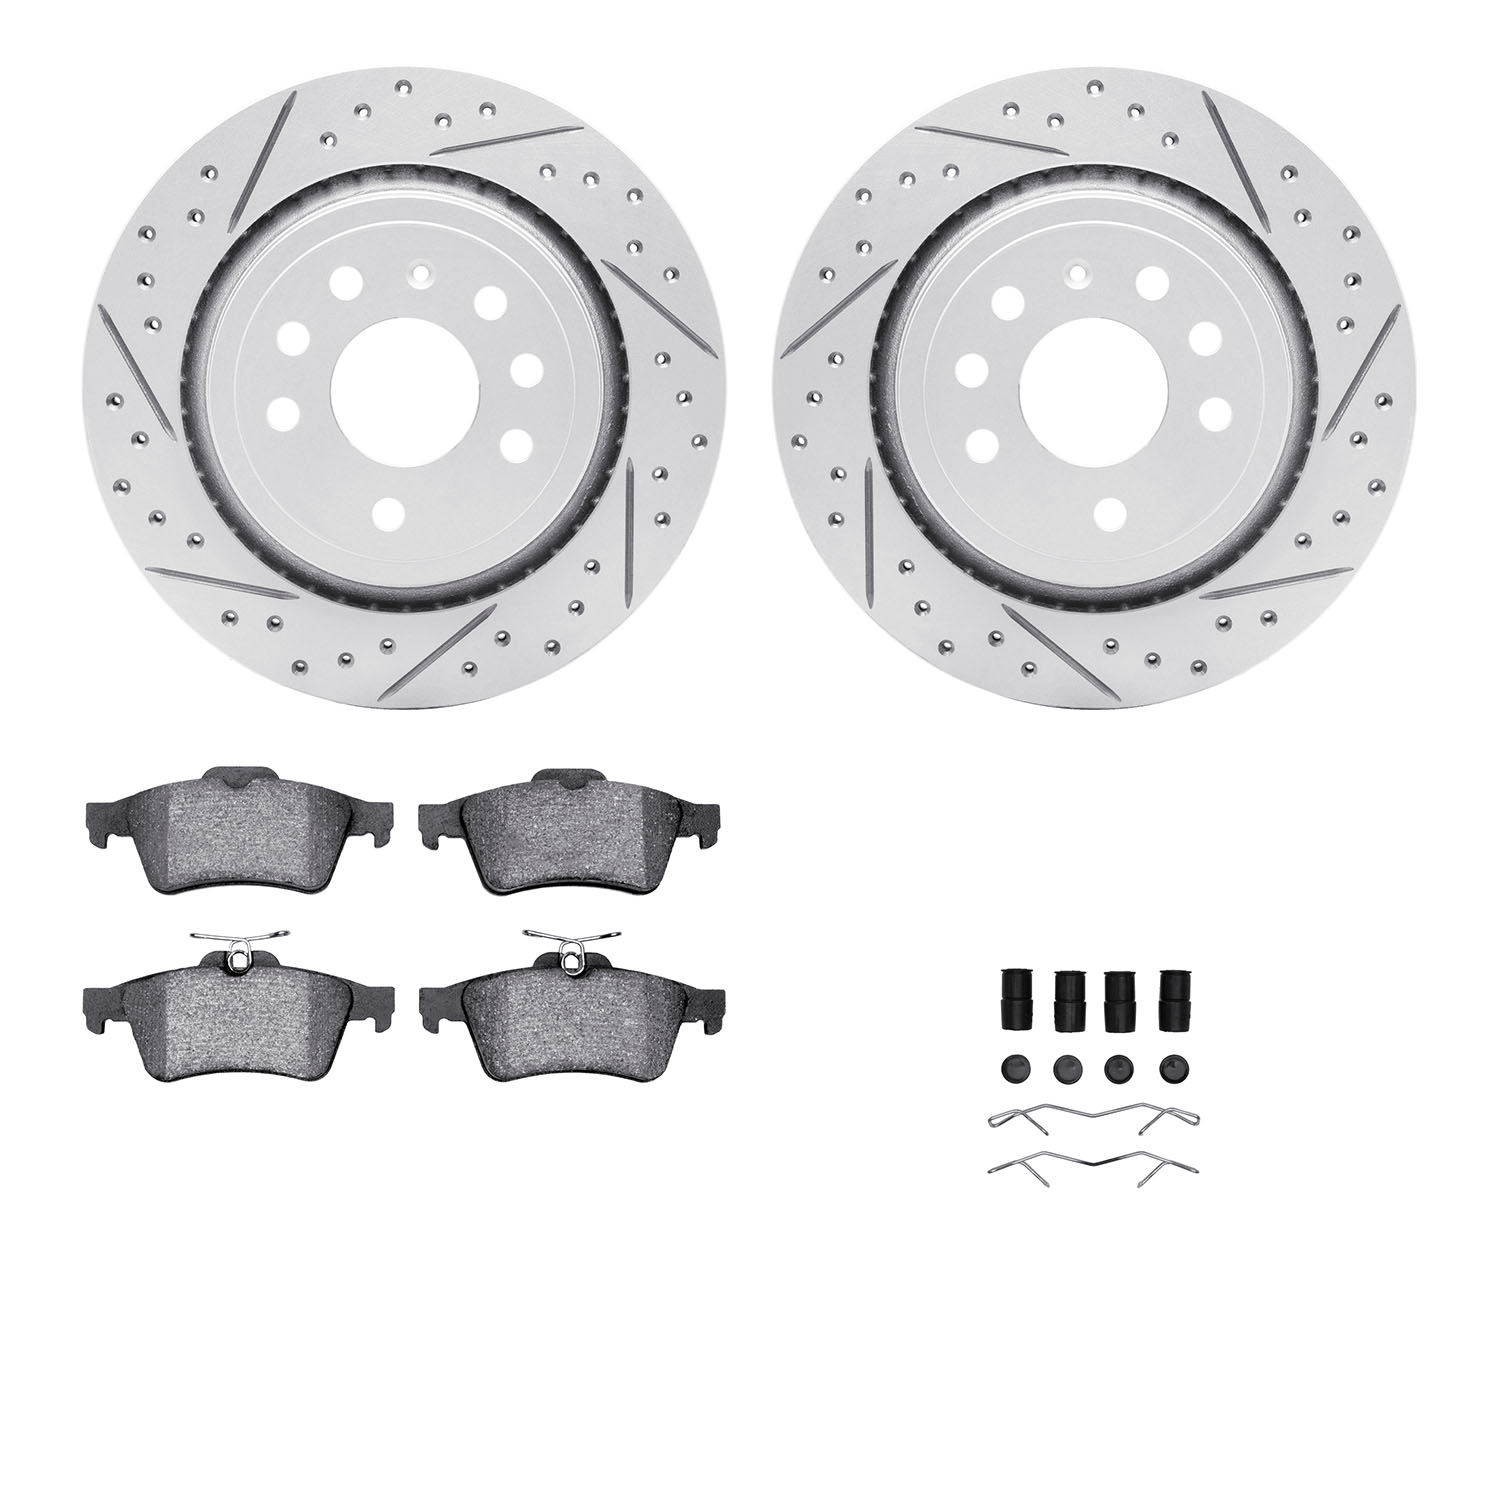 2512-65013 Geoperformance Drilled/Slotted Rotors w/5000 Advanced Brake Pads Kit & Hardware, 2003-2003 GM, Position: Rear